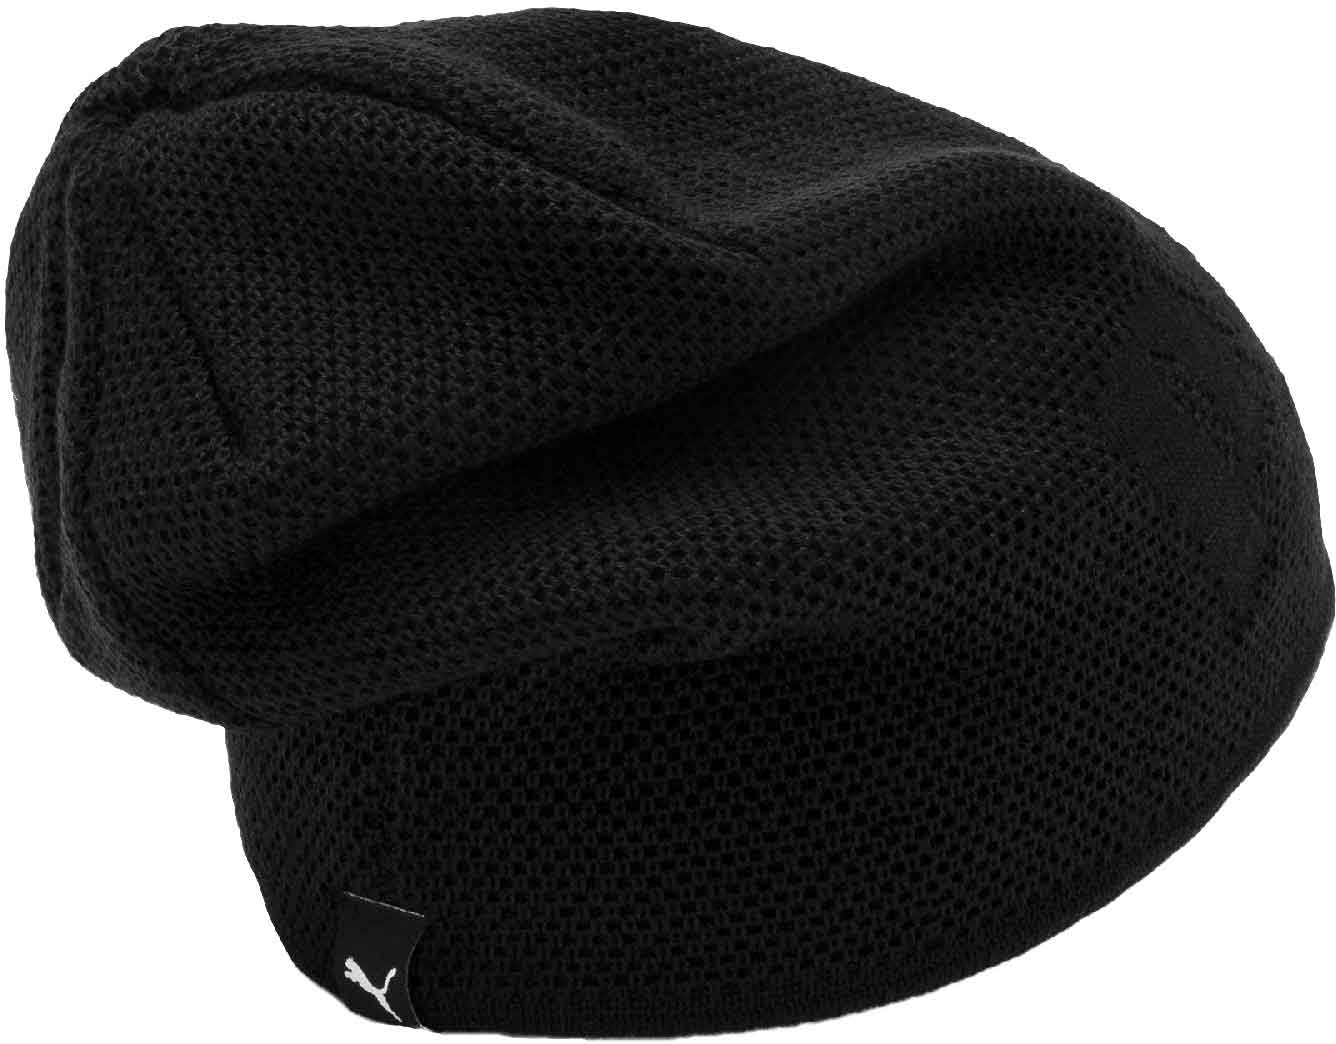 Knitted sports beanie